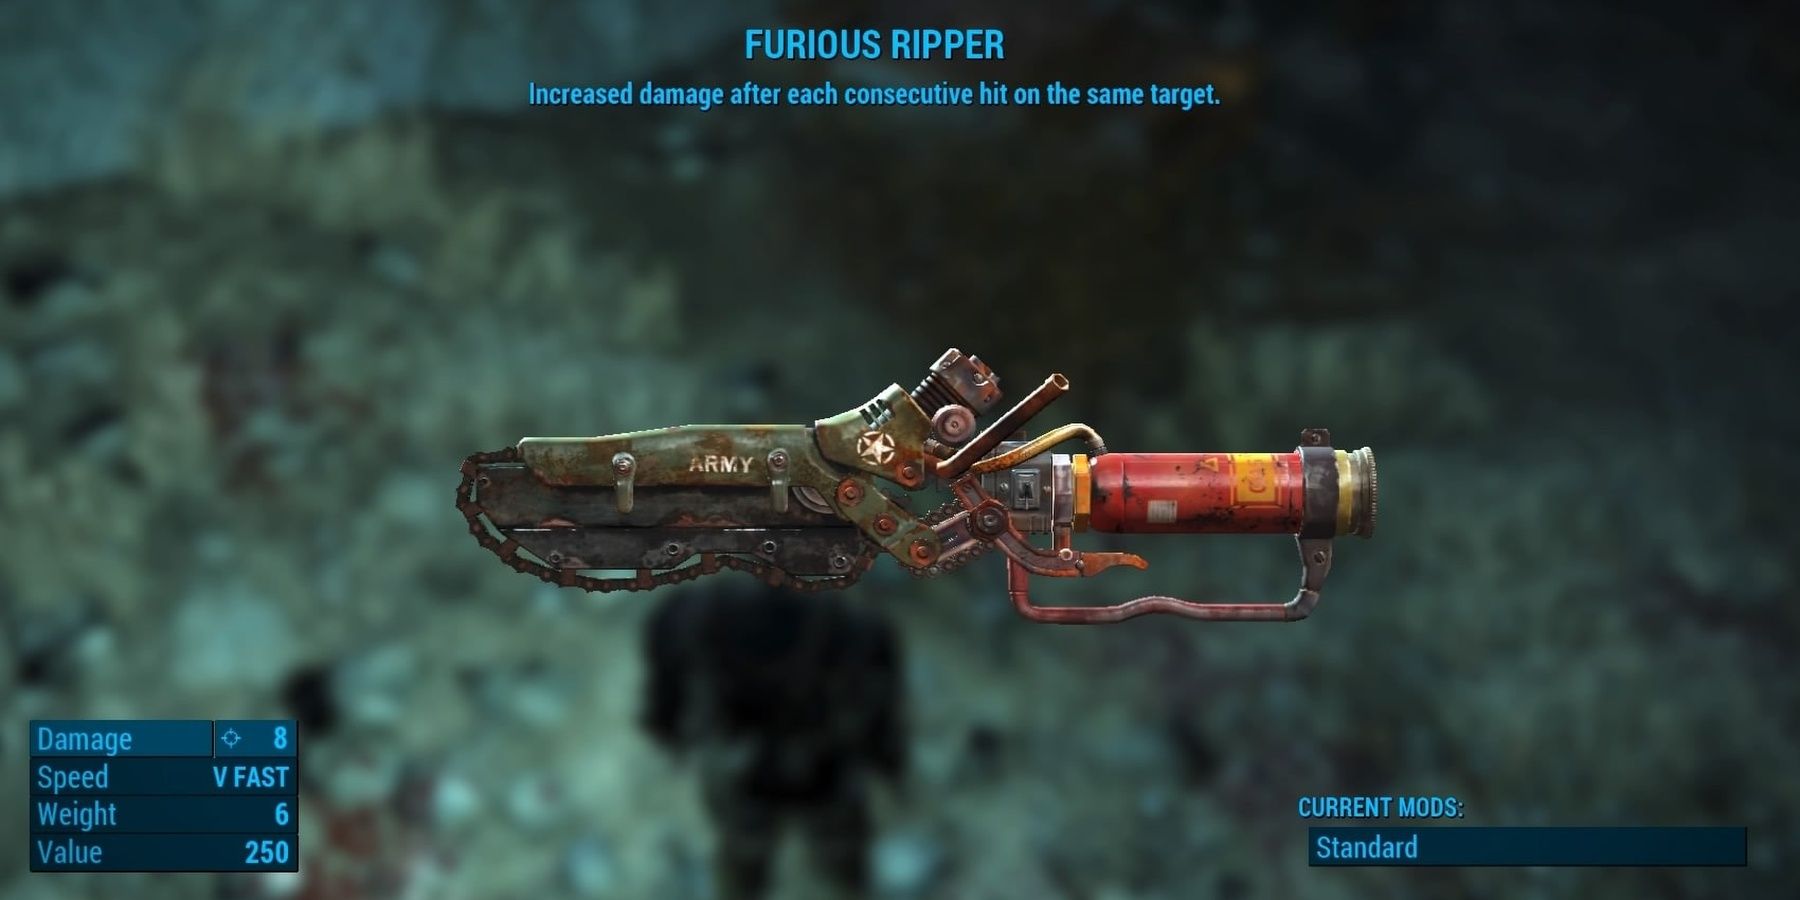 Furious Ripper Weapon in Fallout 4